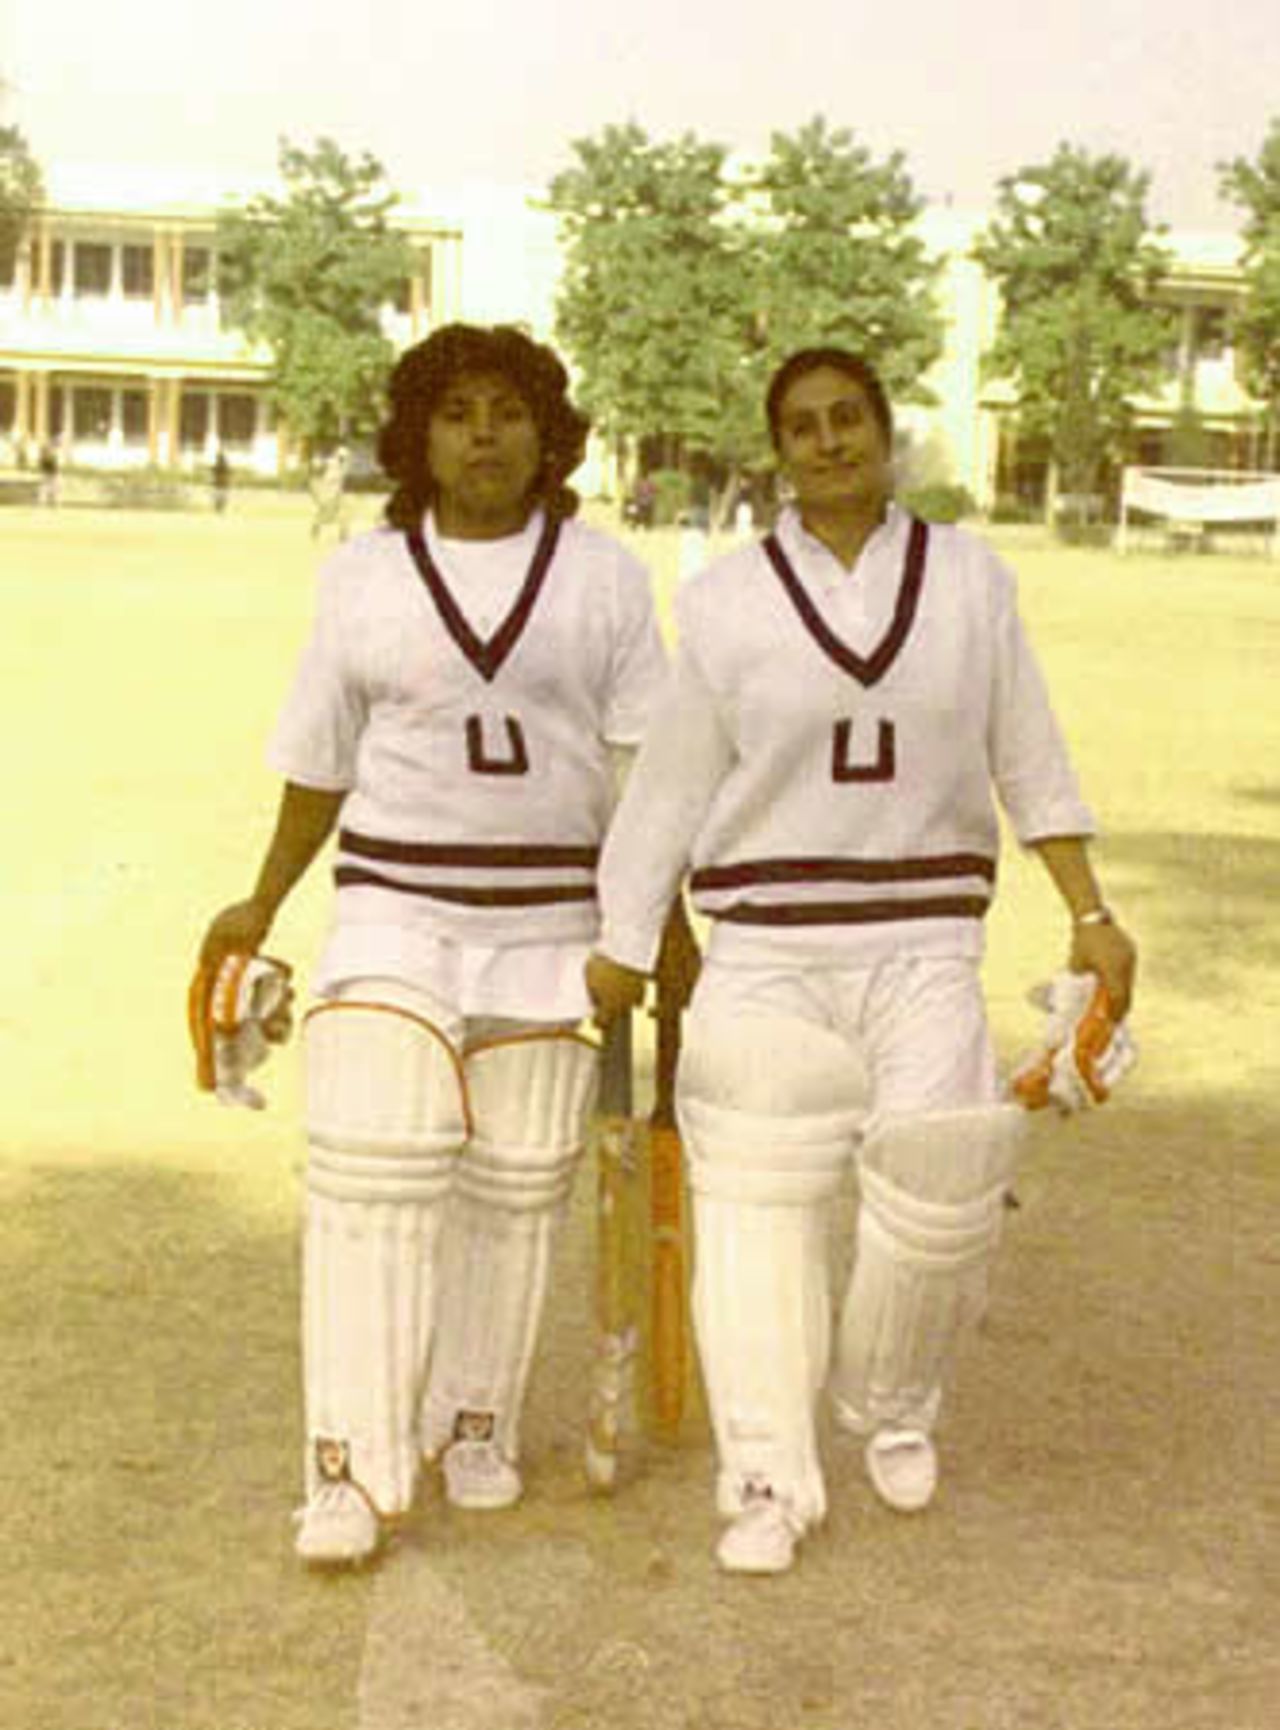 Azraa Parveen and Raeesa Ilyas returning victorious after a match, Lahore College for Women Ground